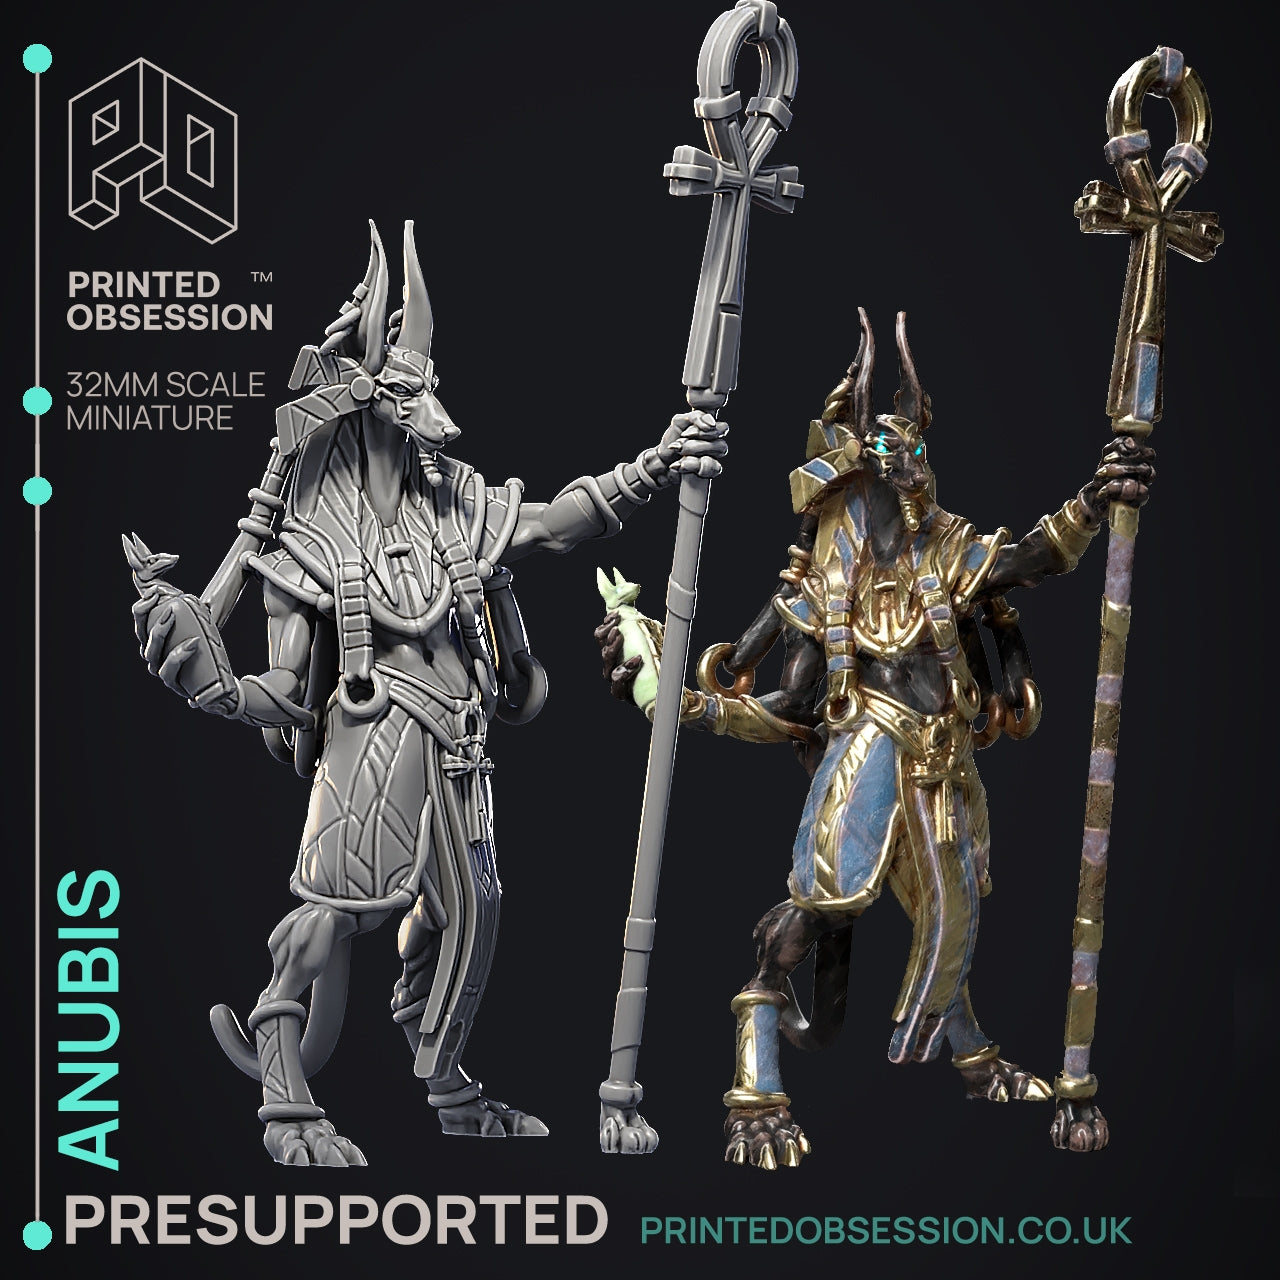 Anubis - Court of Anubis - The Printed Obsession - Table-top mini, 3D Printed Collectable for painting and playing!